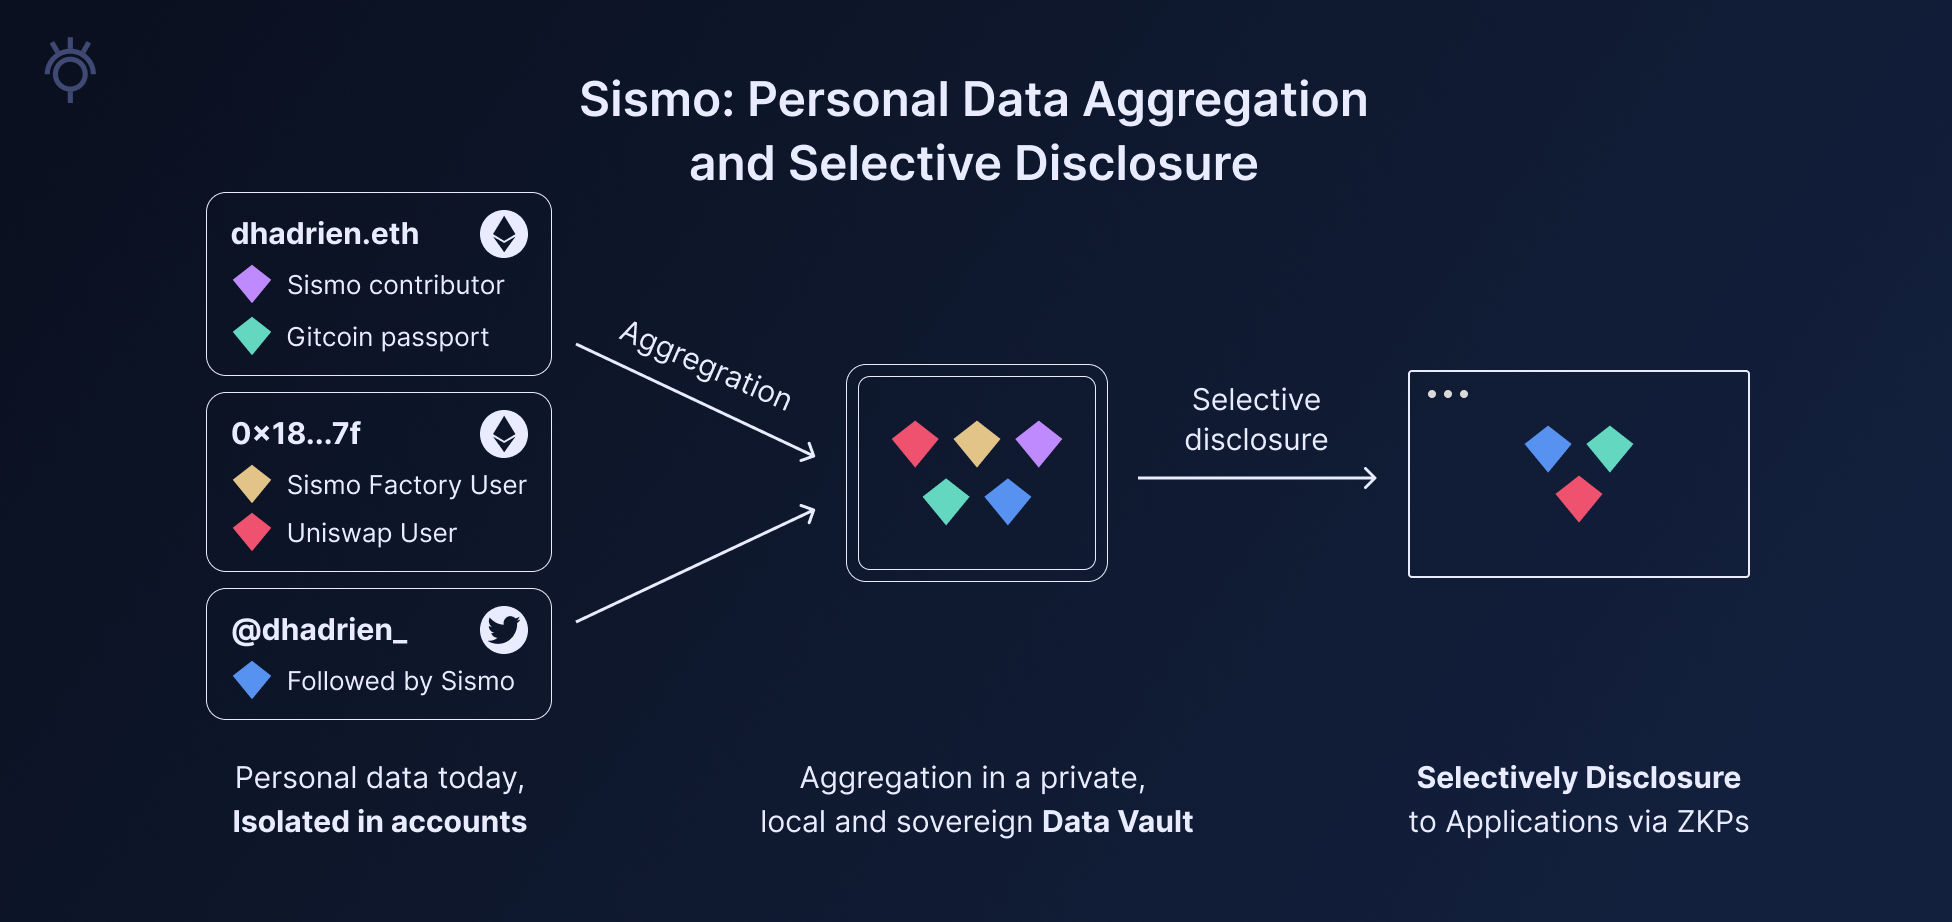 Sismo: Personal Data Aggregation and Selective Disclosure